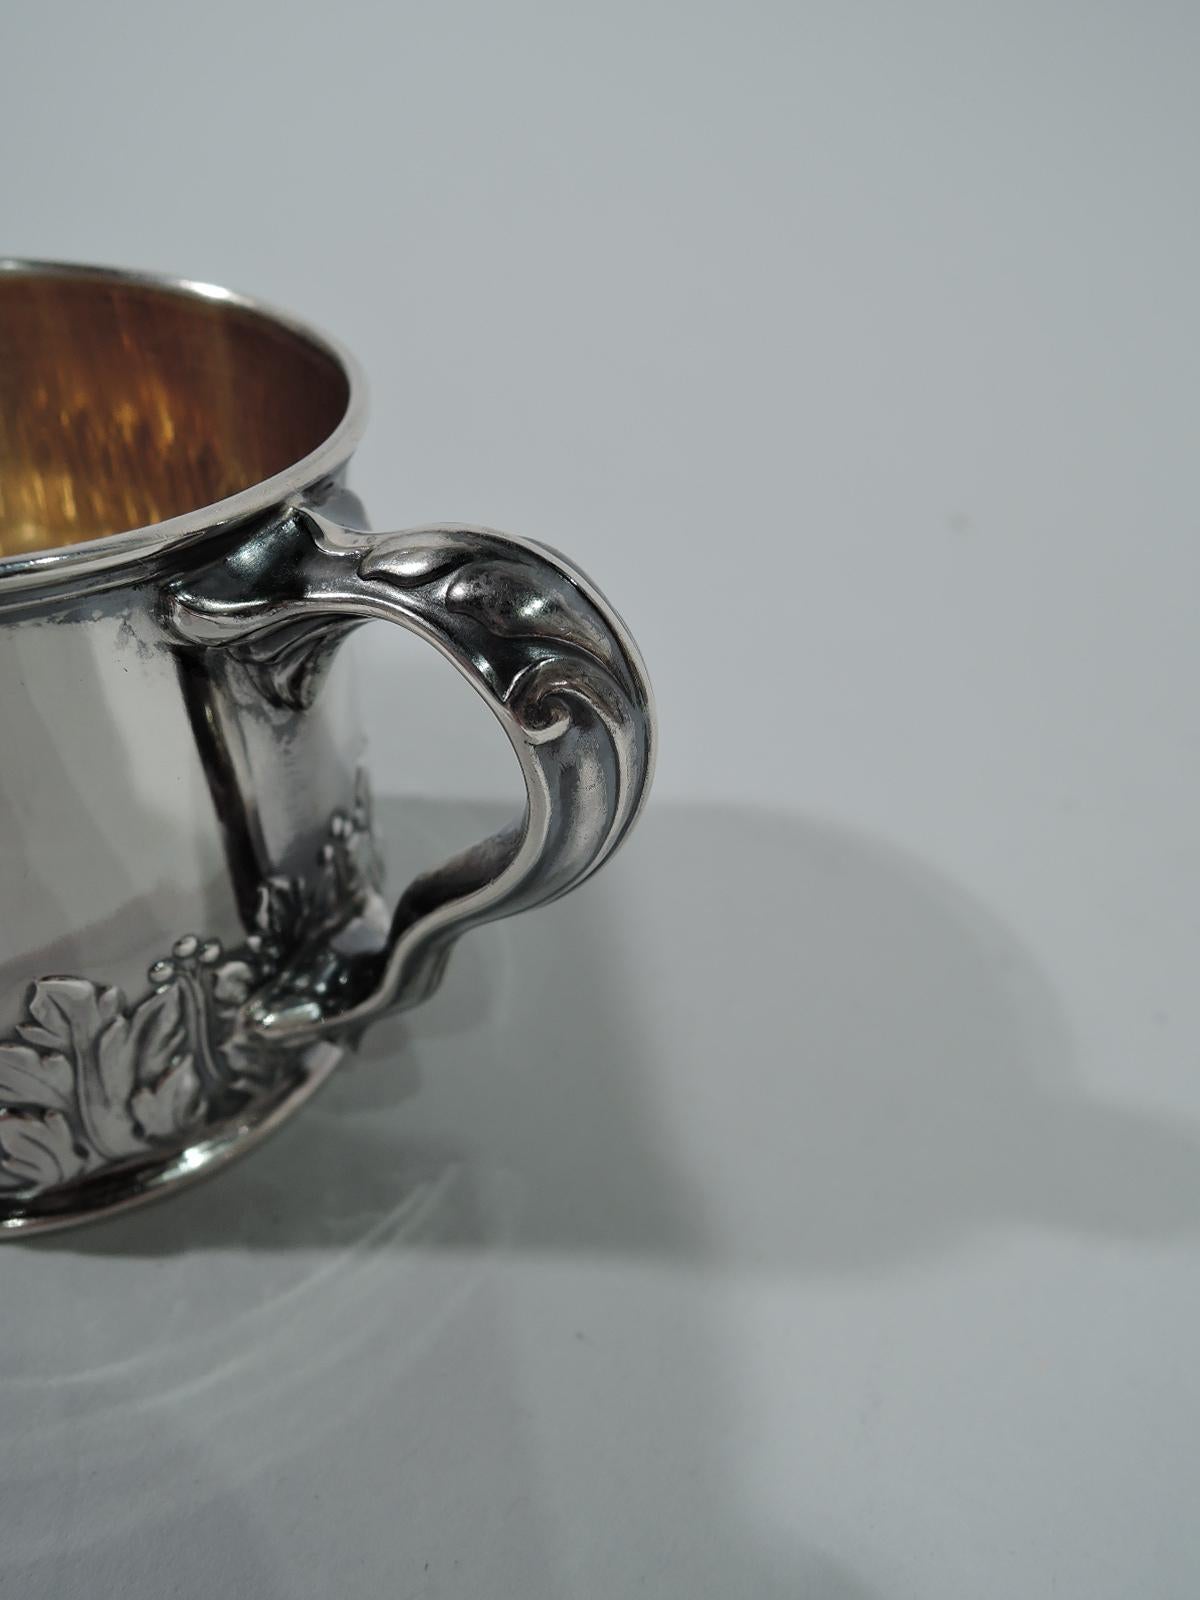 Classical sterling silver baby cup. Made by Gorham in Providence in 1896. Drum-form with leaf-capped scrolled handle. Chased leaf-and-dart border at bottom with lots of room leftover for engraving. Gilt interior. Hallmark includes no. 5230 and date